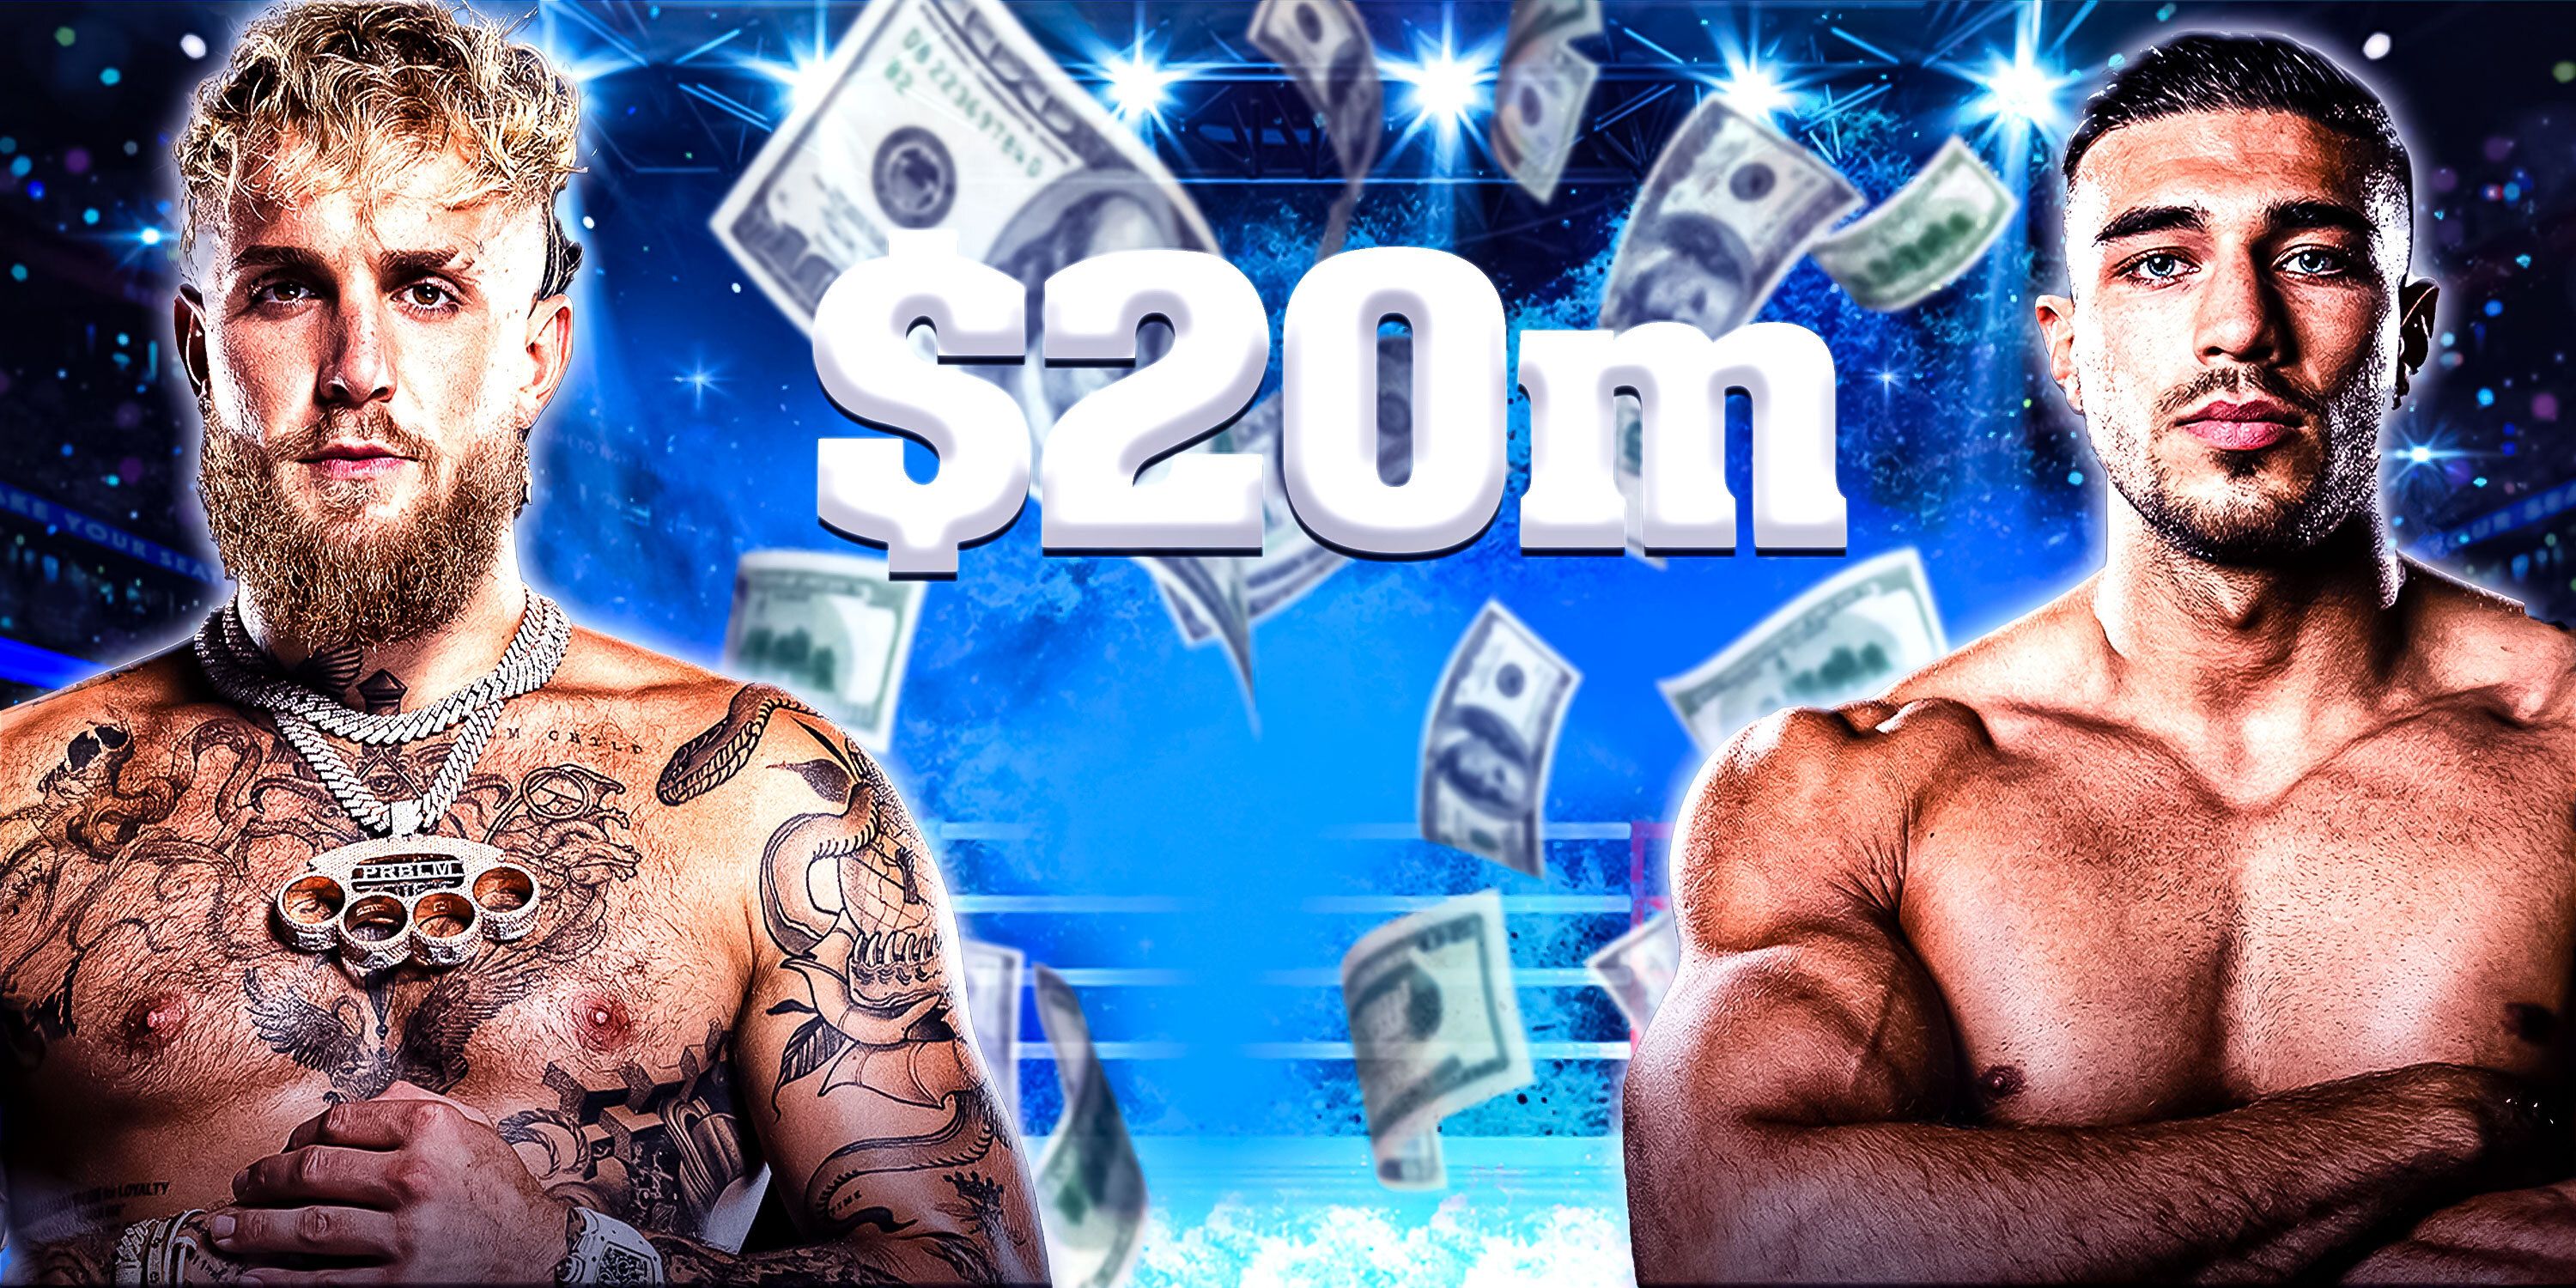 Jake Paul's $20m offer to Tommy Fury